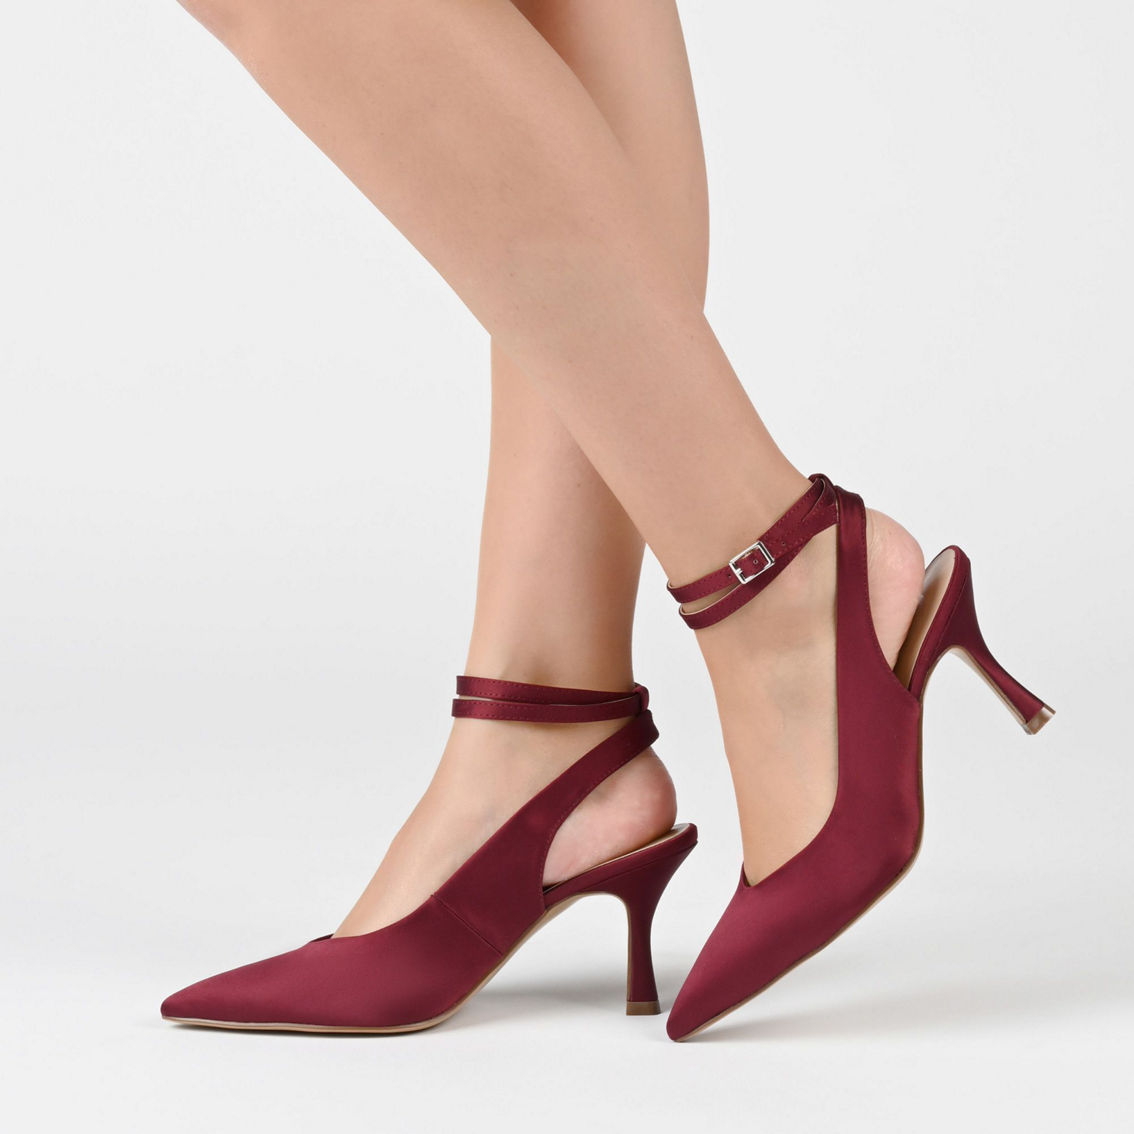 Journee Collection Women's Marcella Pump - Image 5 of 5